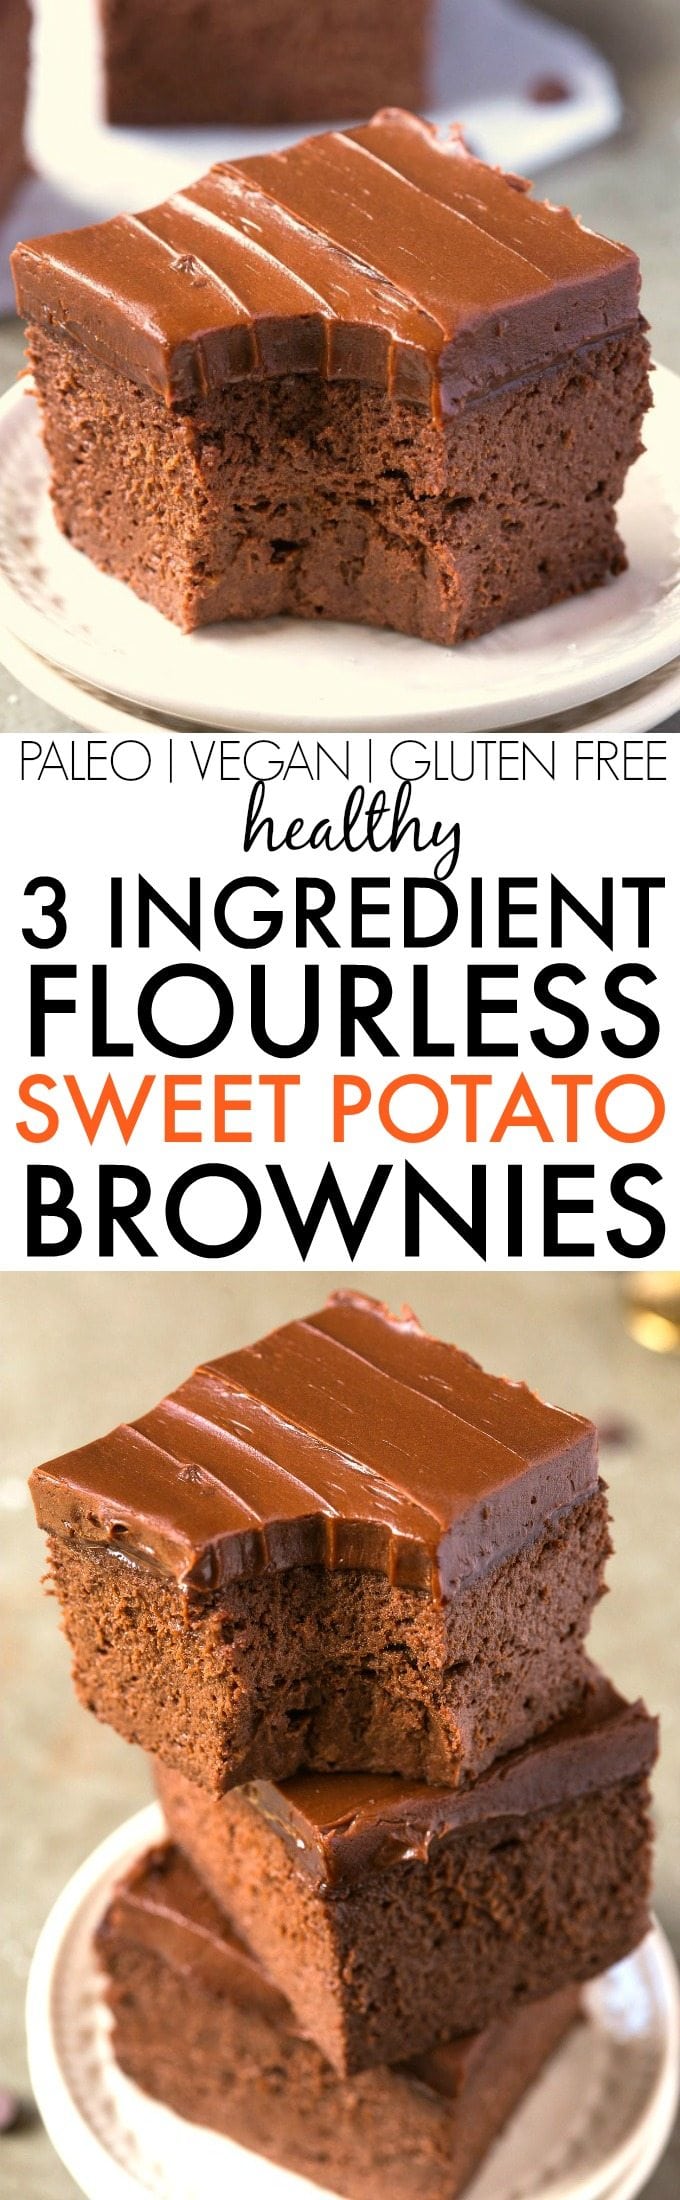 Healthy 3 Ingredient FLOURLESS Sweet Potato Brownies- SO easy, simple and fudgy- NO butter, NO flour, NO sugar and NO oil needed at all! {vegan, gluten free, paleo recipe}- thebigmansworld.com